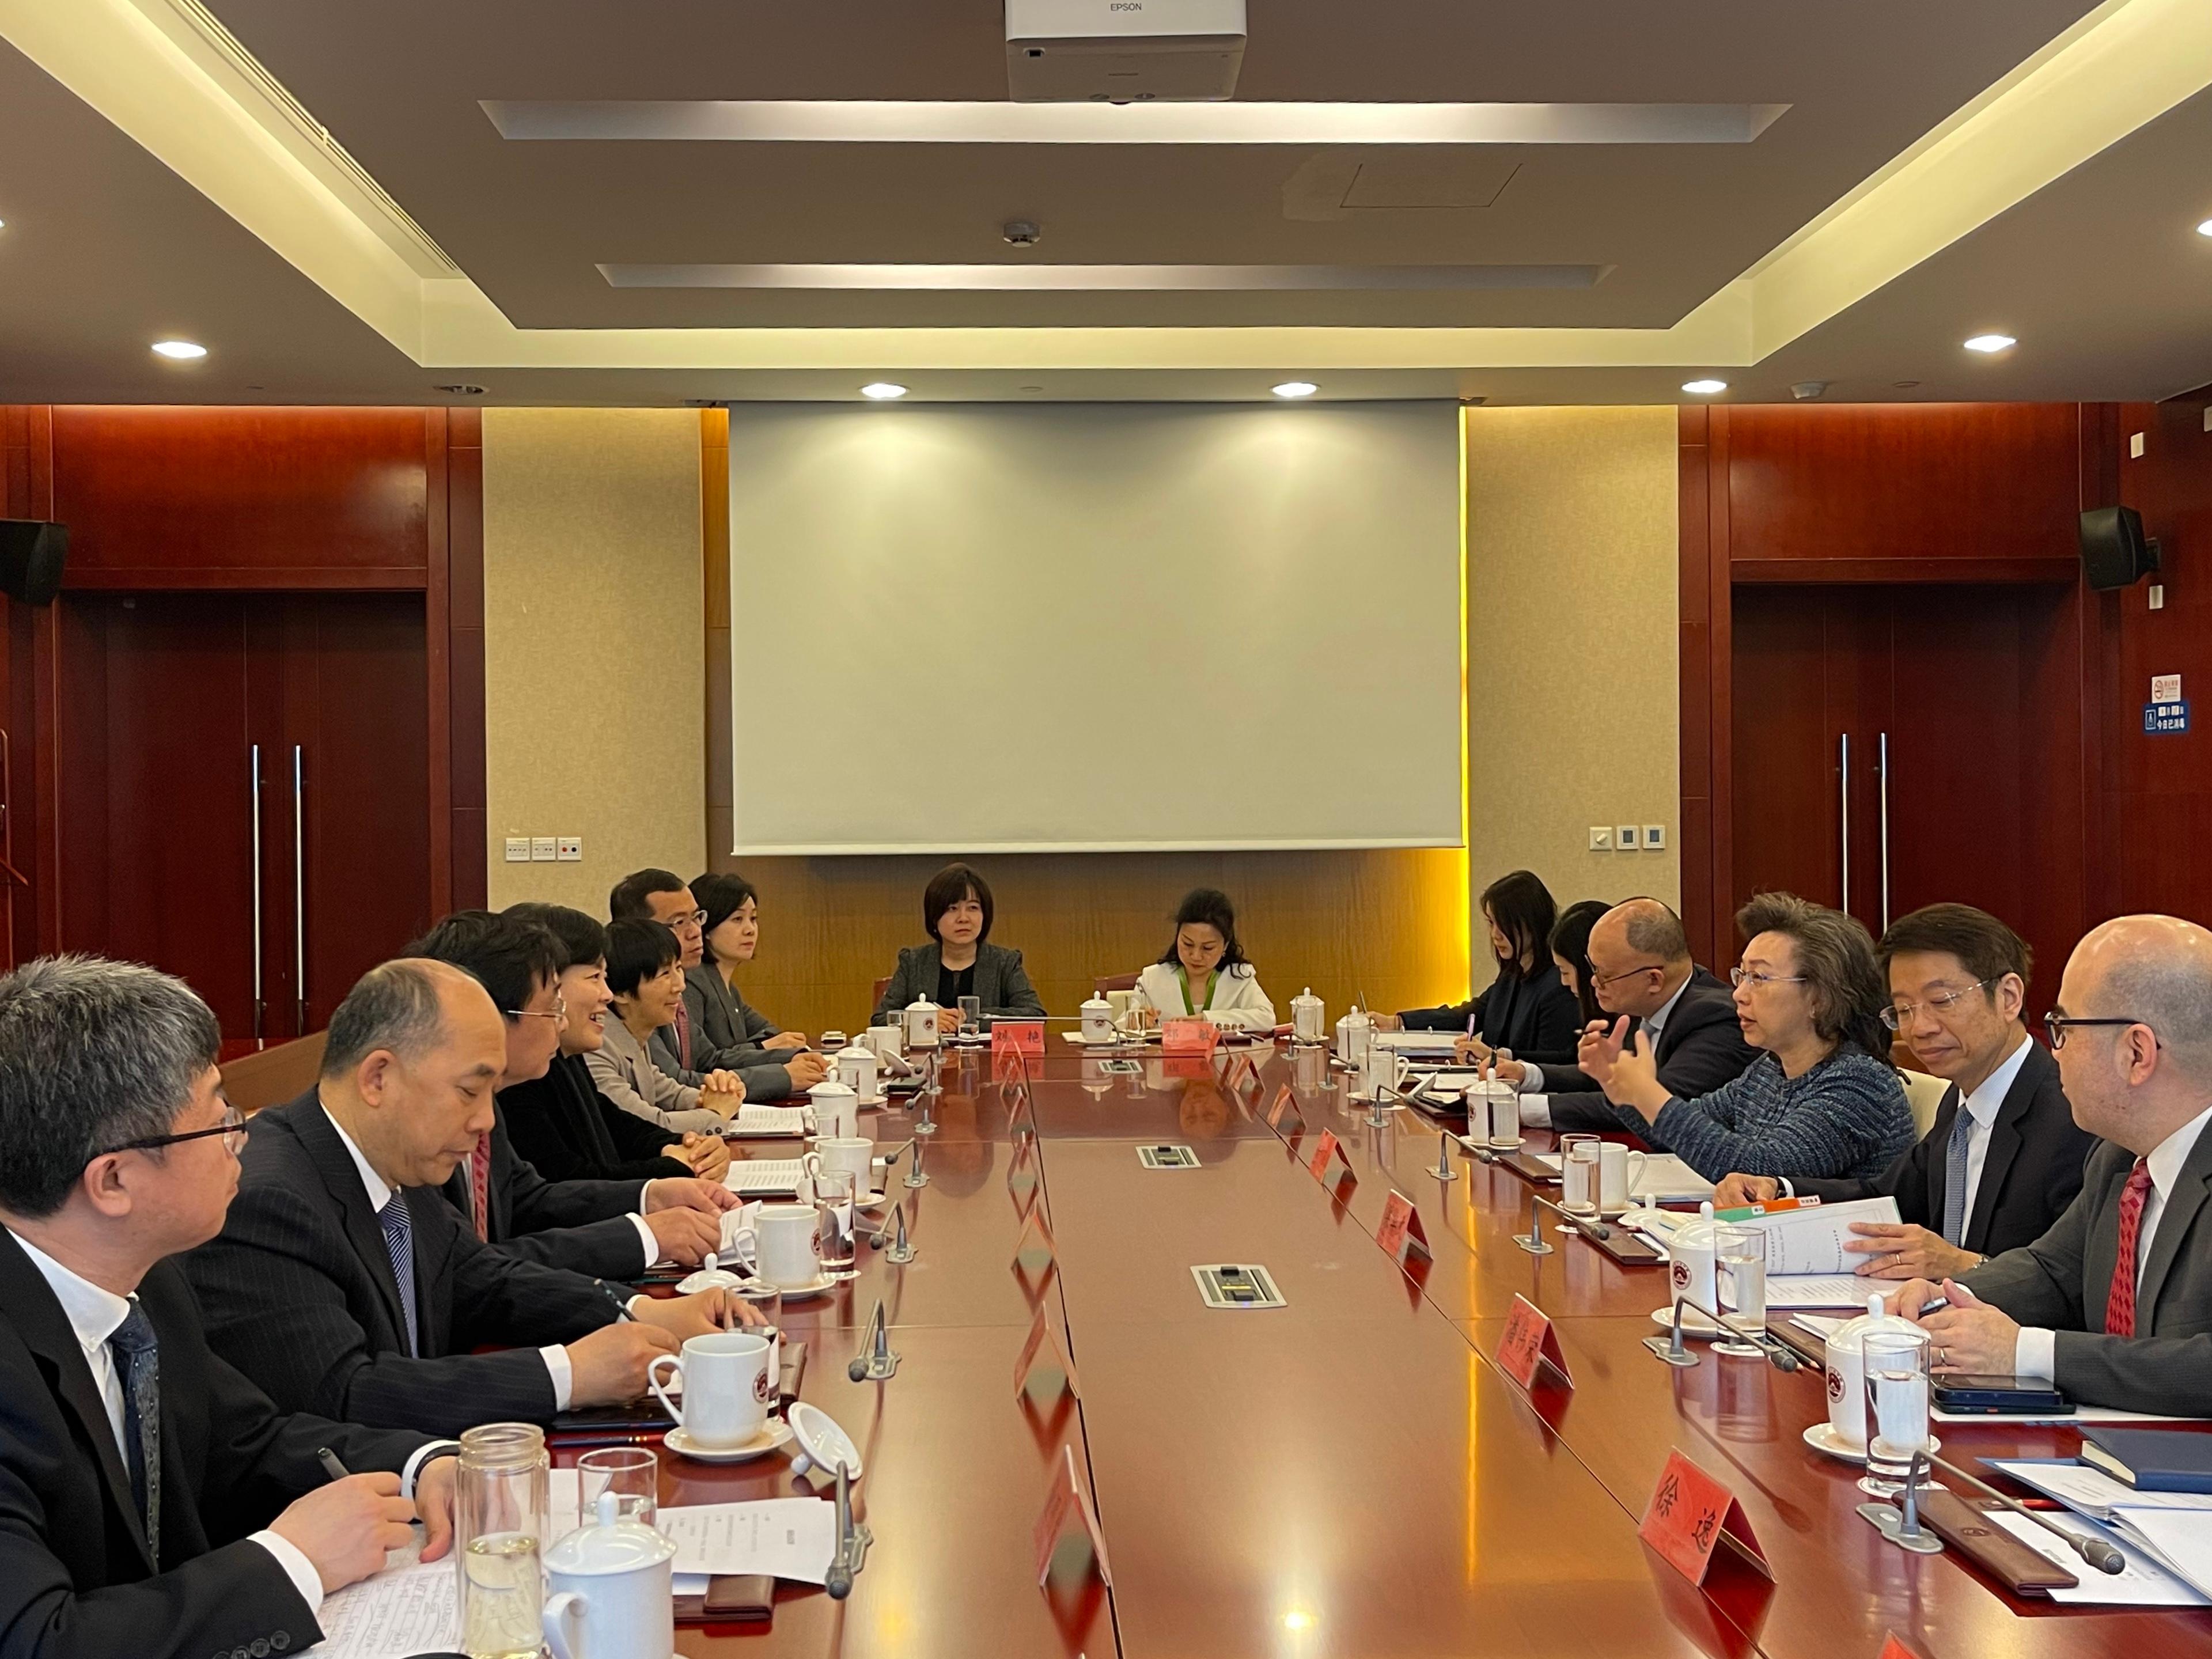 The Secretary for the Civil Service, Mrs Ingrid Yeung, continued her visit in Beijing today (April 27) and called on the National Academy of Governance (NAG) in the morning. Photo shows Mrs Yeung (third right) and the Permanent Secretary for the Civil Service, Mr Clement Leung (second right) in a meeting with the Director-General of the Office of Hong Kong, Macao and Taiwan Affairs of the NAG, Ms Dong Qing (fourth left), and the Director of the Hong Kong and Macao International Training Center of the NAG, Mr Xie Yutong (third left).

